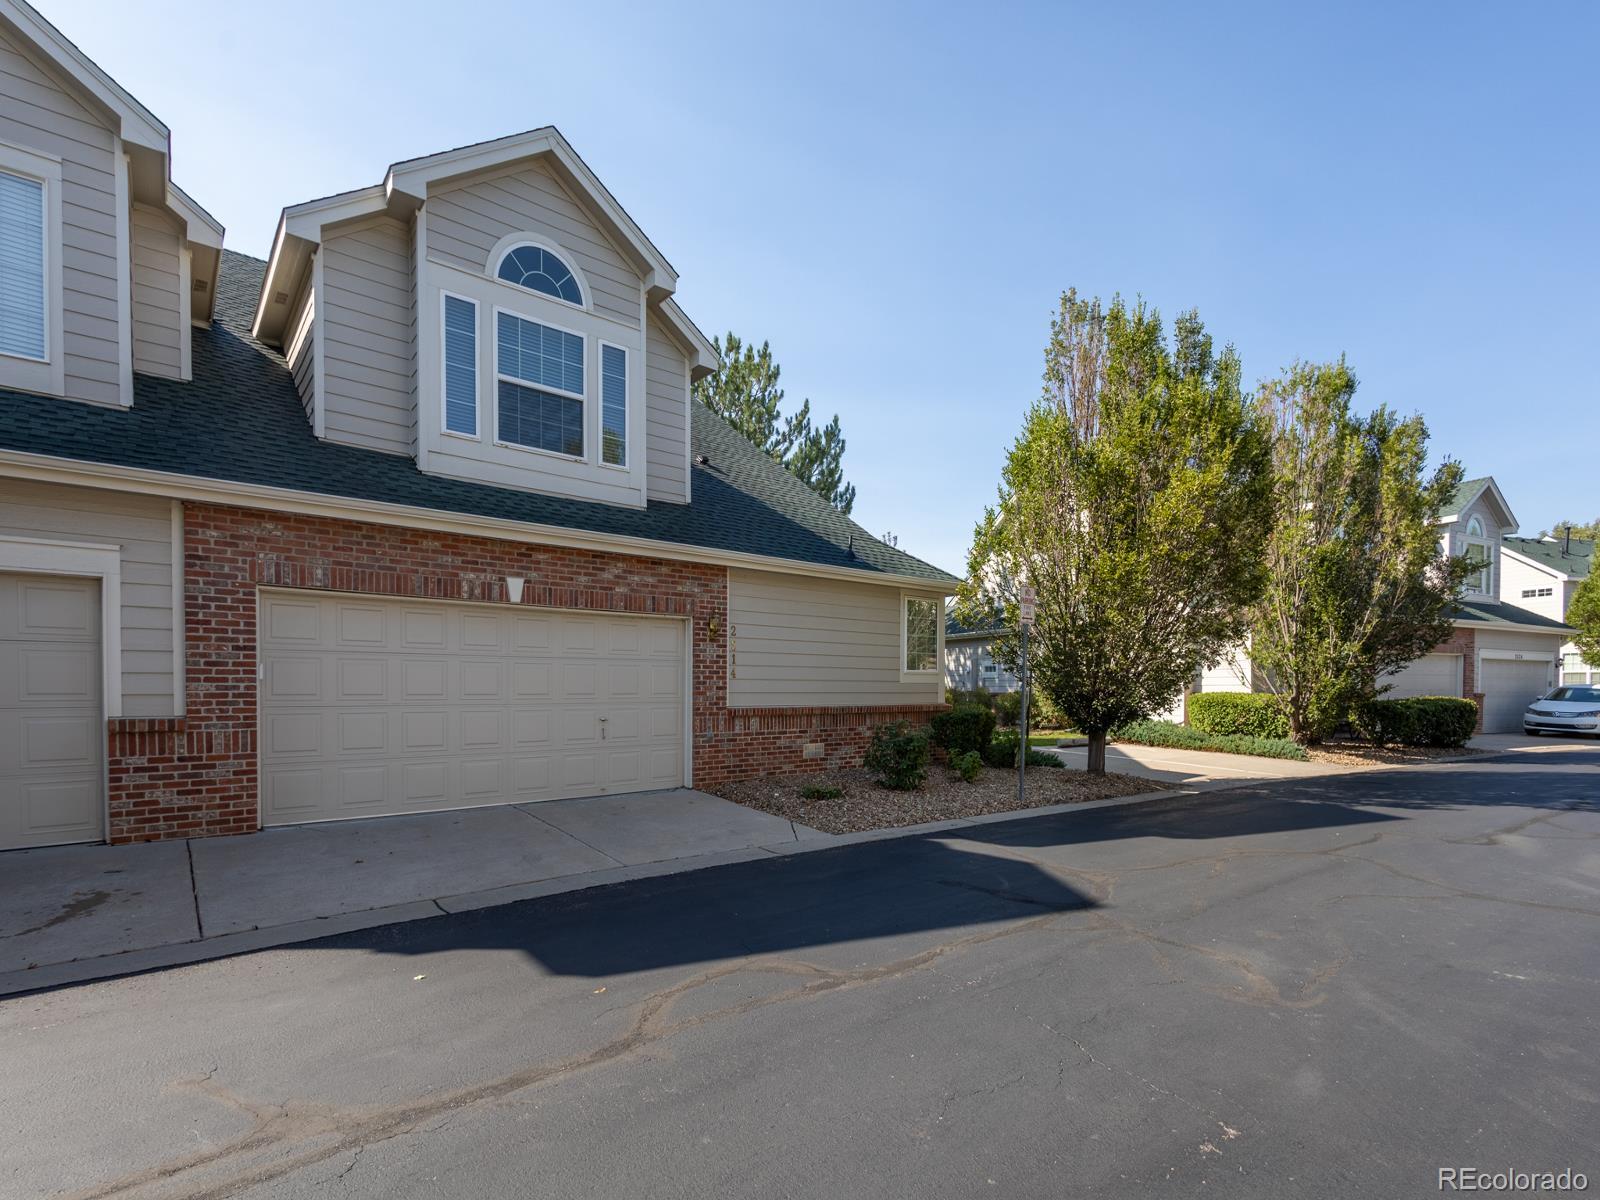 2514 s toledo way, Aurora sold home. Closed on 2023-09-13 for $444,000.